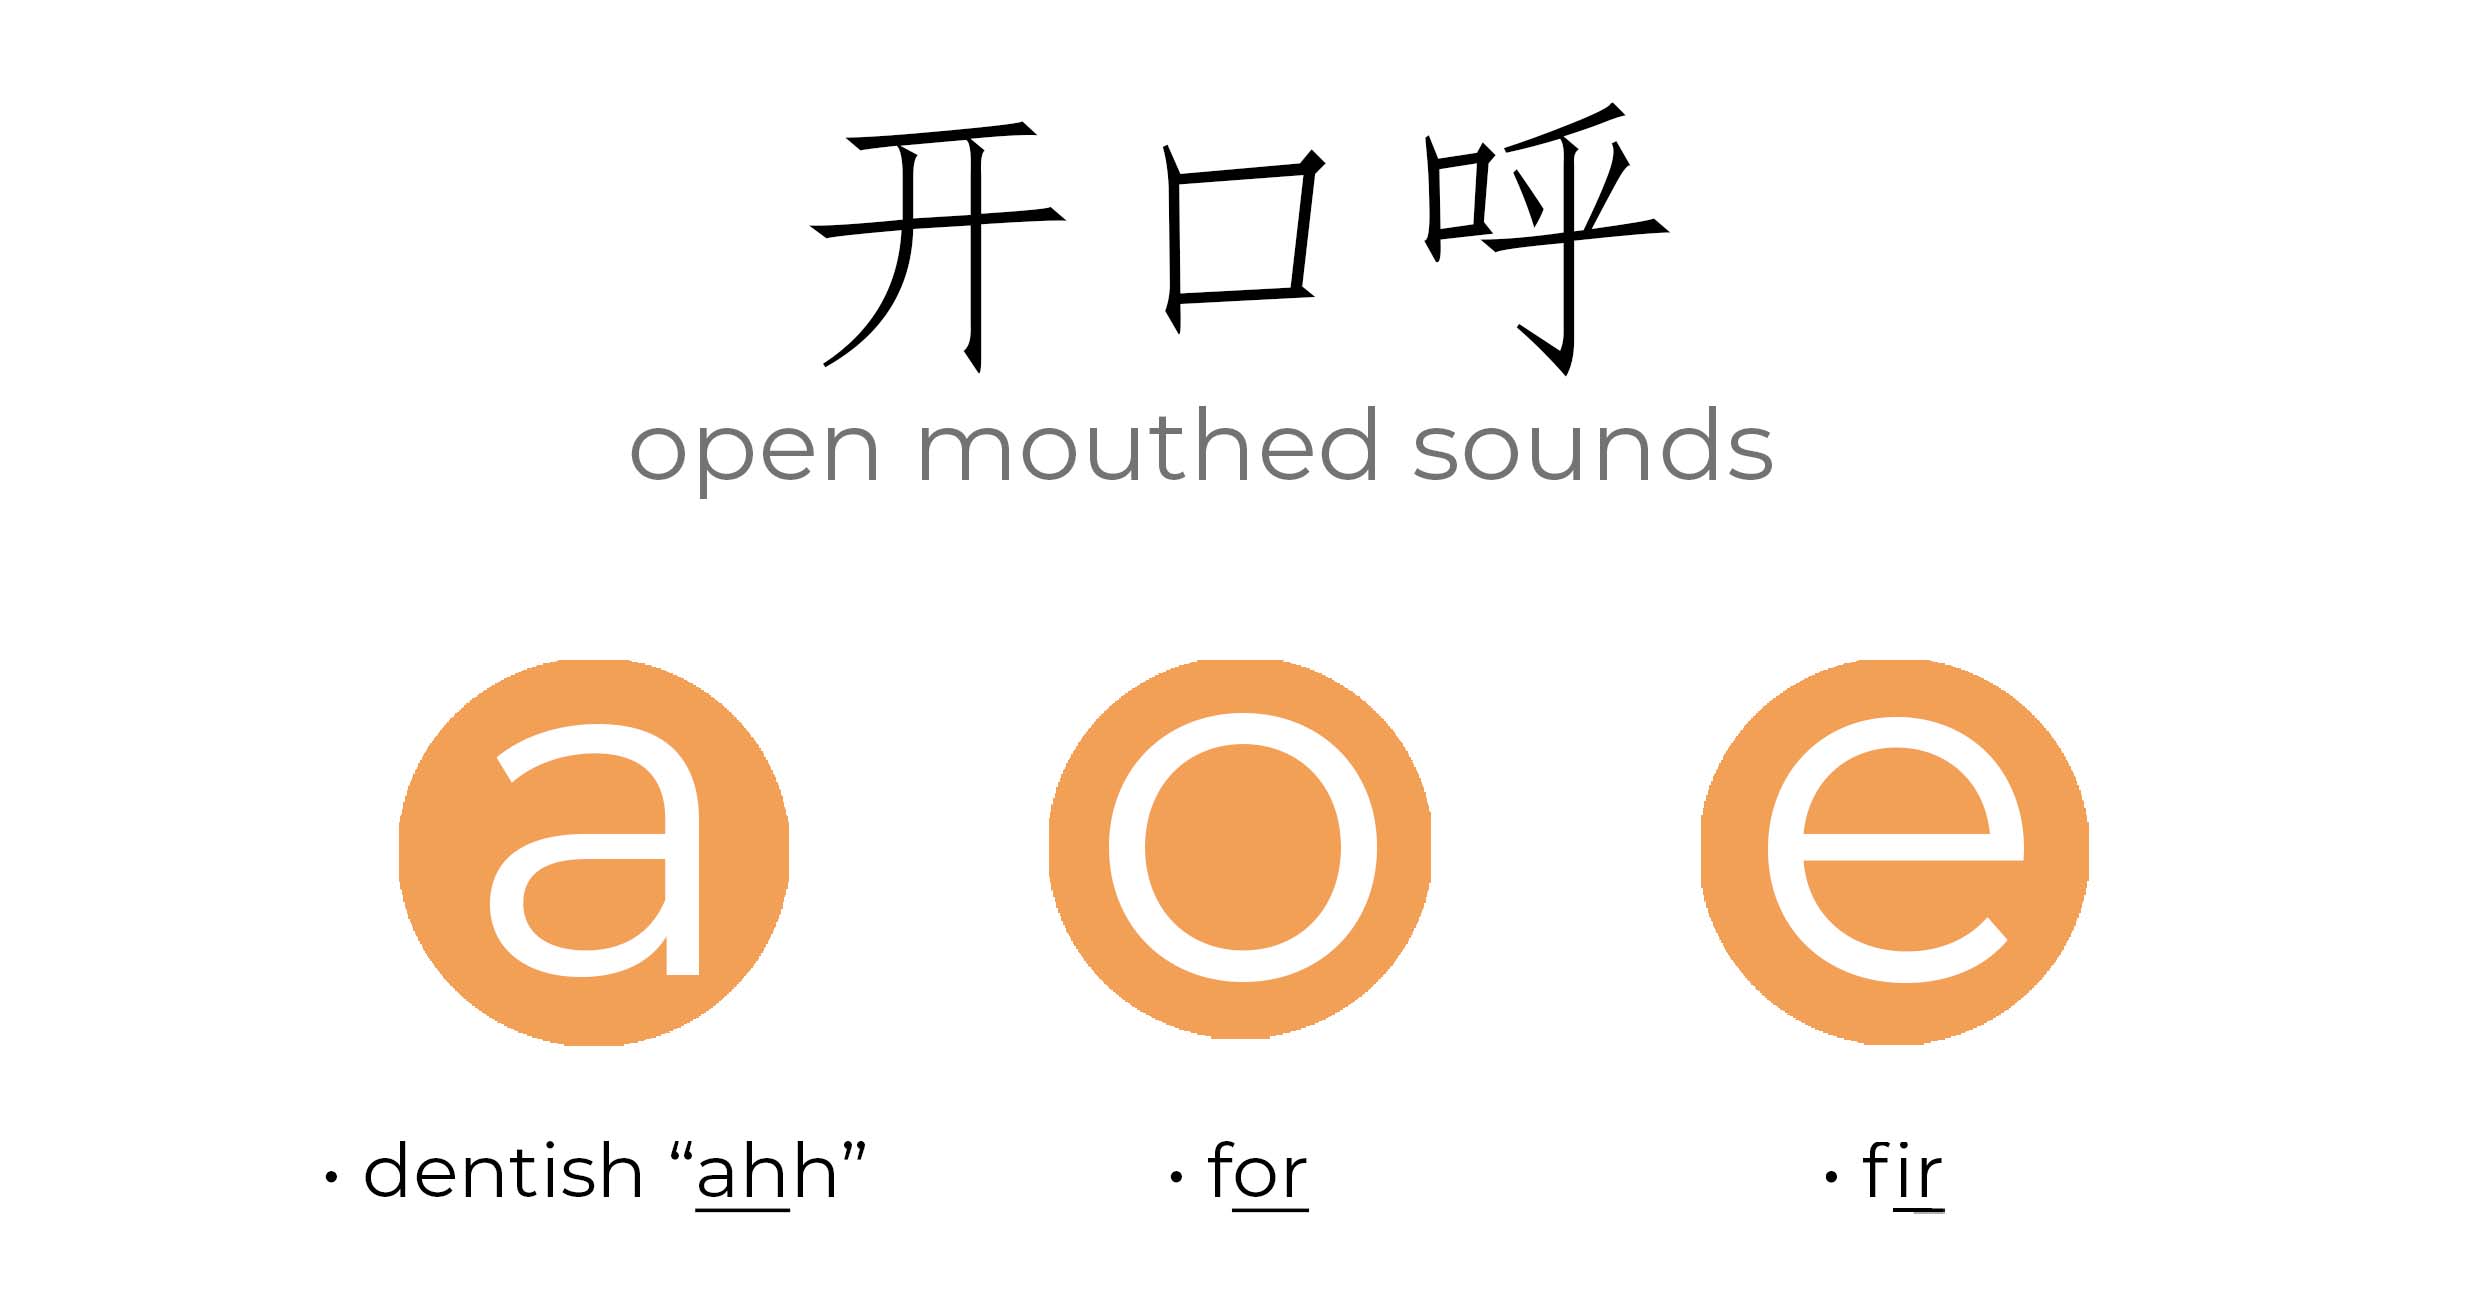 open mouthed sounds graphic